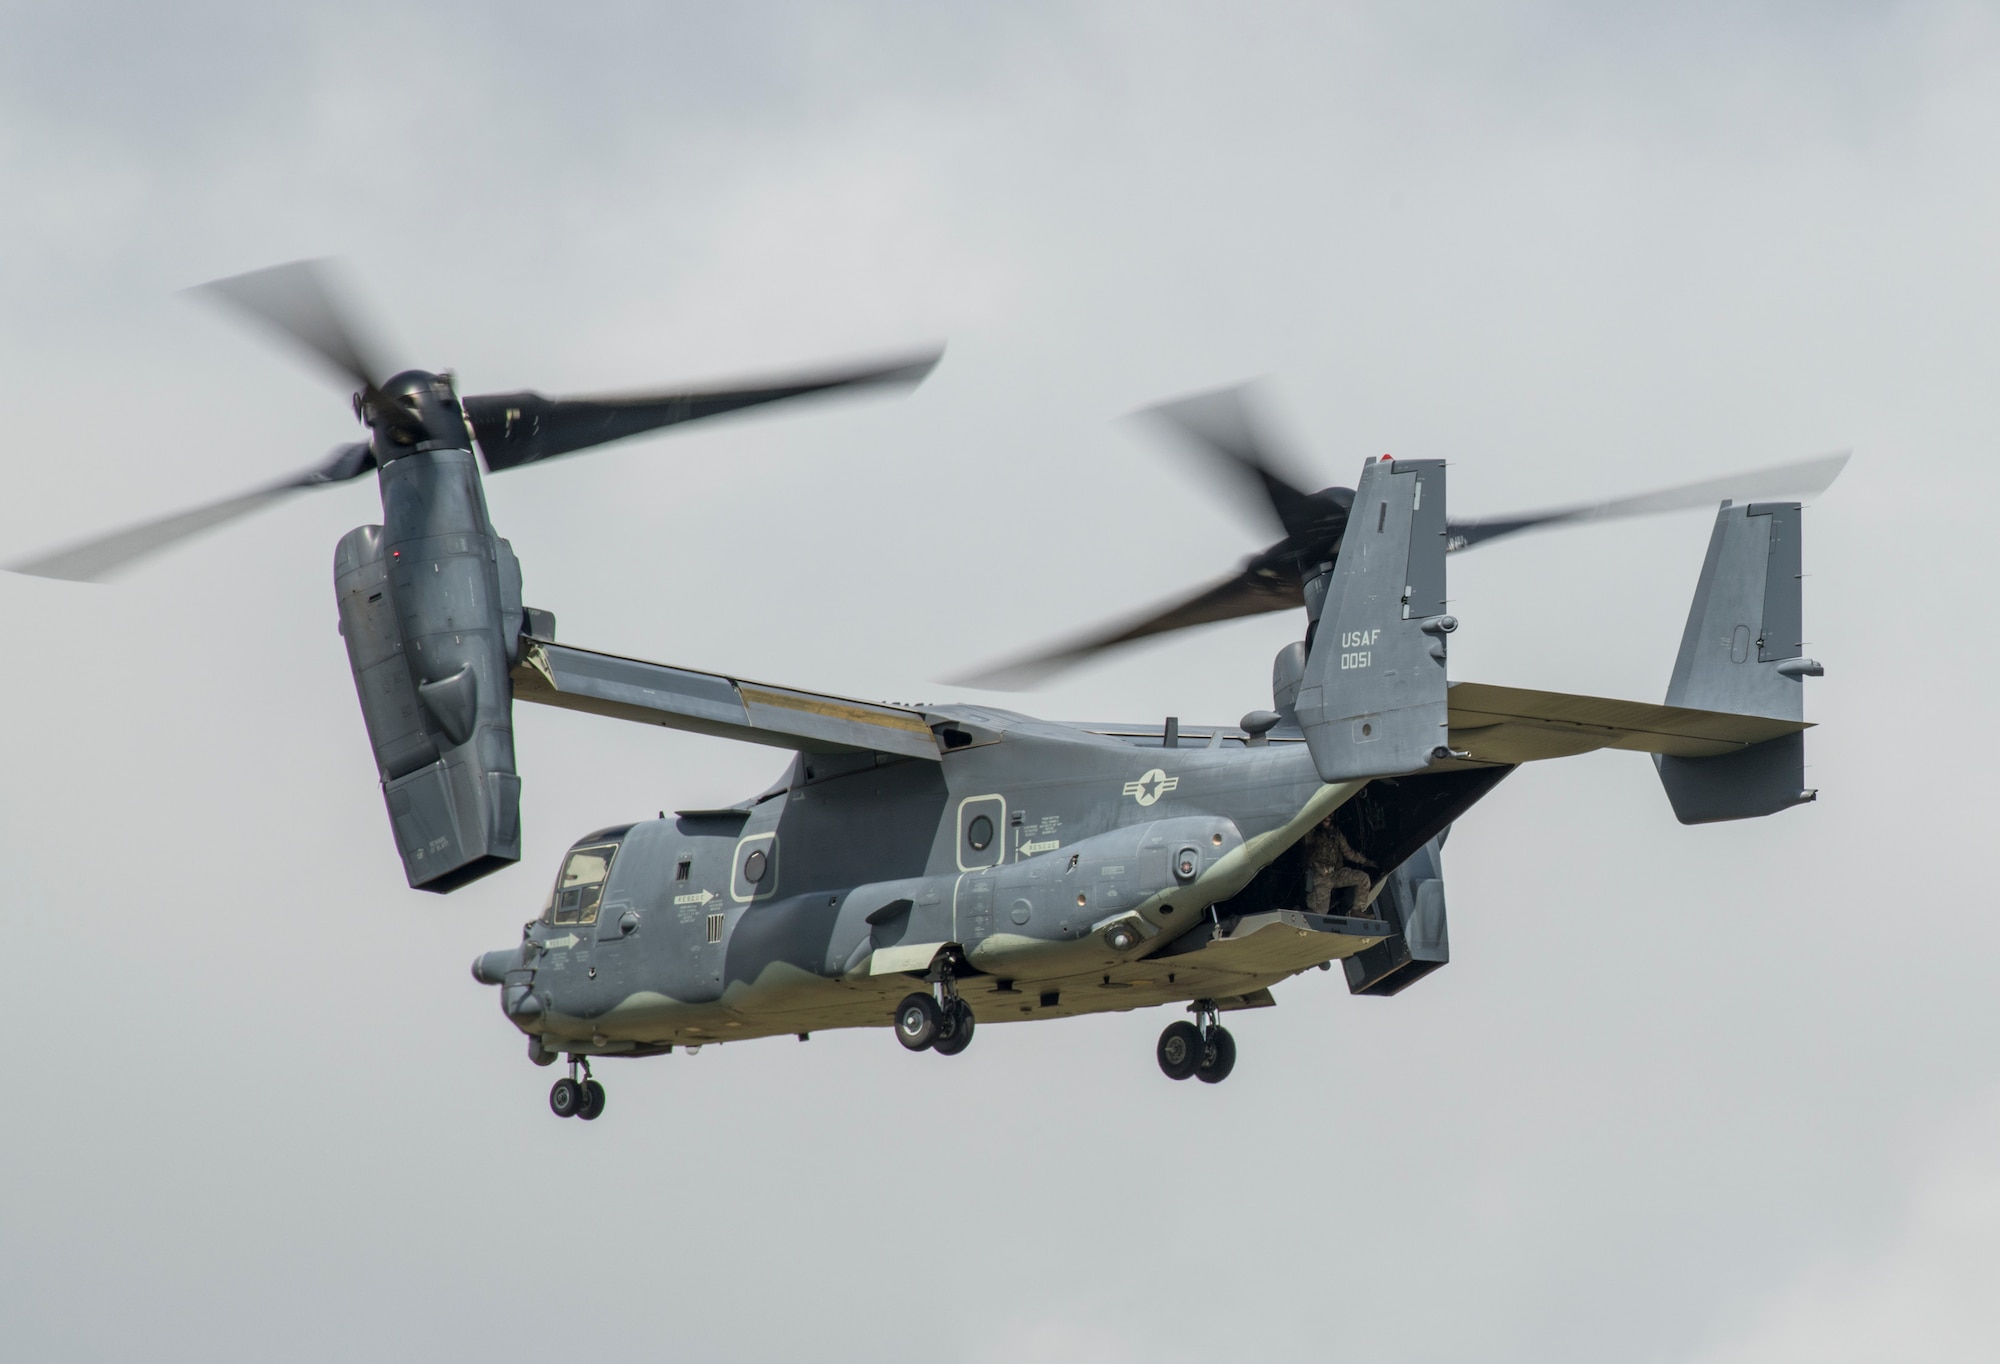 A U.S. Air Force CV-22 Osprey flies during the 2019 Royal International Air Tattoo at RAF Fairford, England, July 20, 2019. This year's RIAT commemorated the 70th anniversary of NATO and highlighted the United States' enduring commitment to its European allies. (U.S. Air Force photo by Airman 1st Class Jennifer Zima)